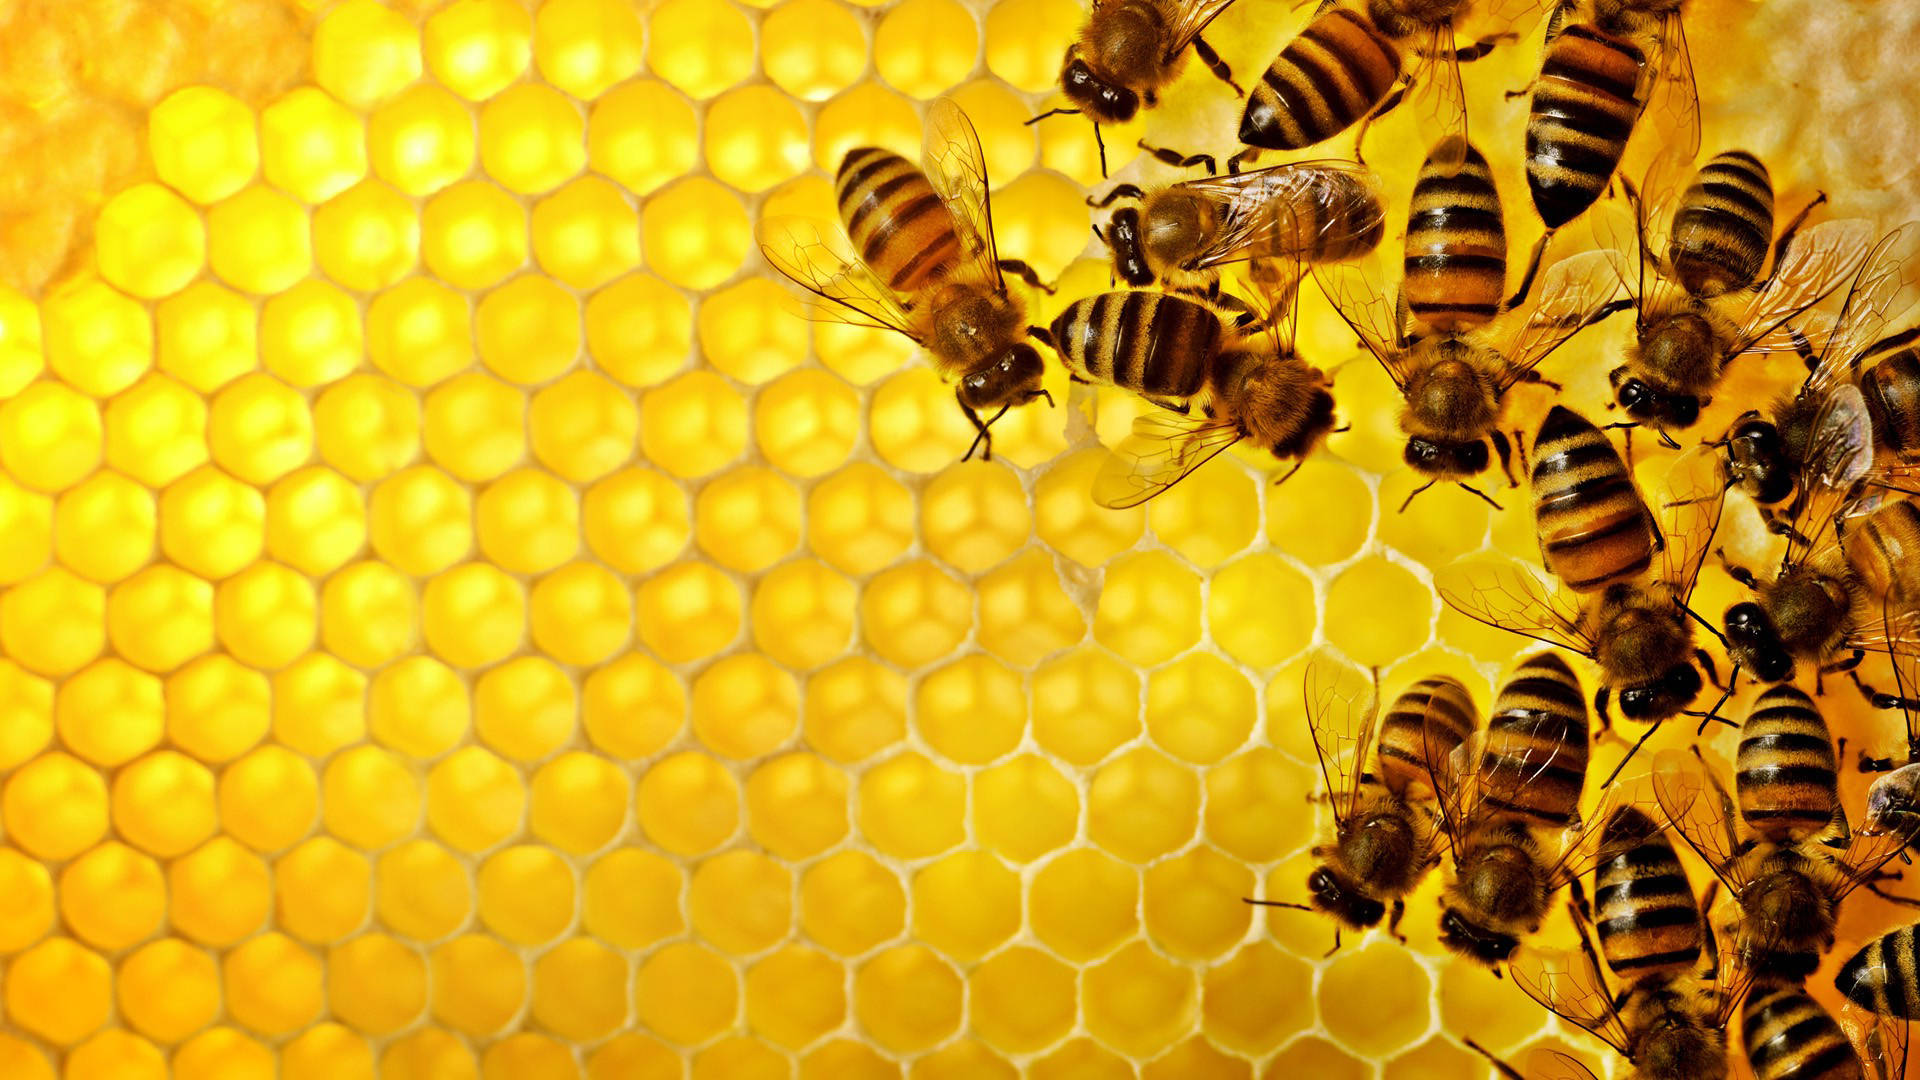 Insects In Beehive Wallpaper